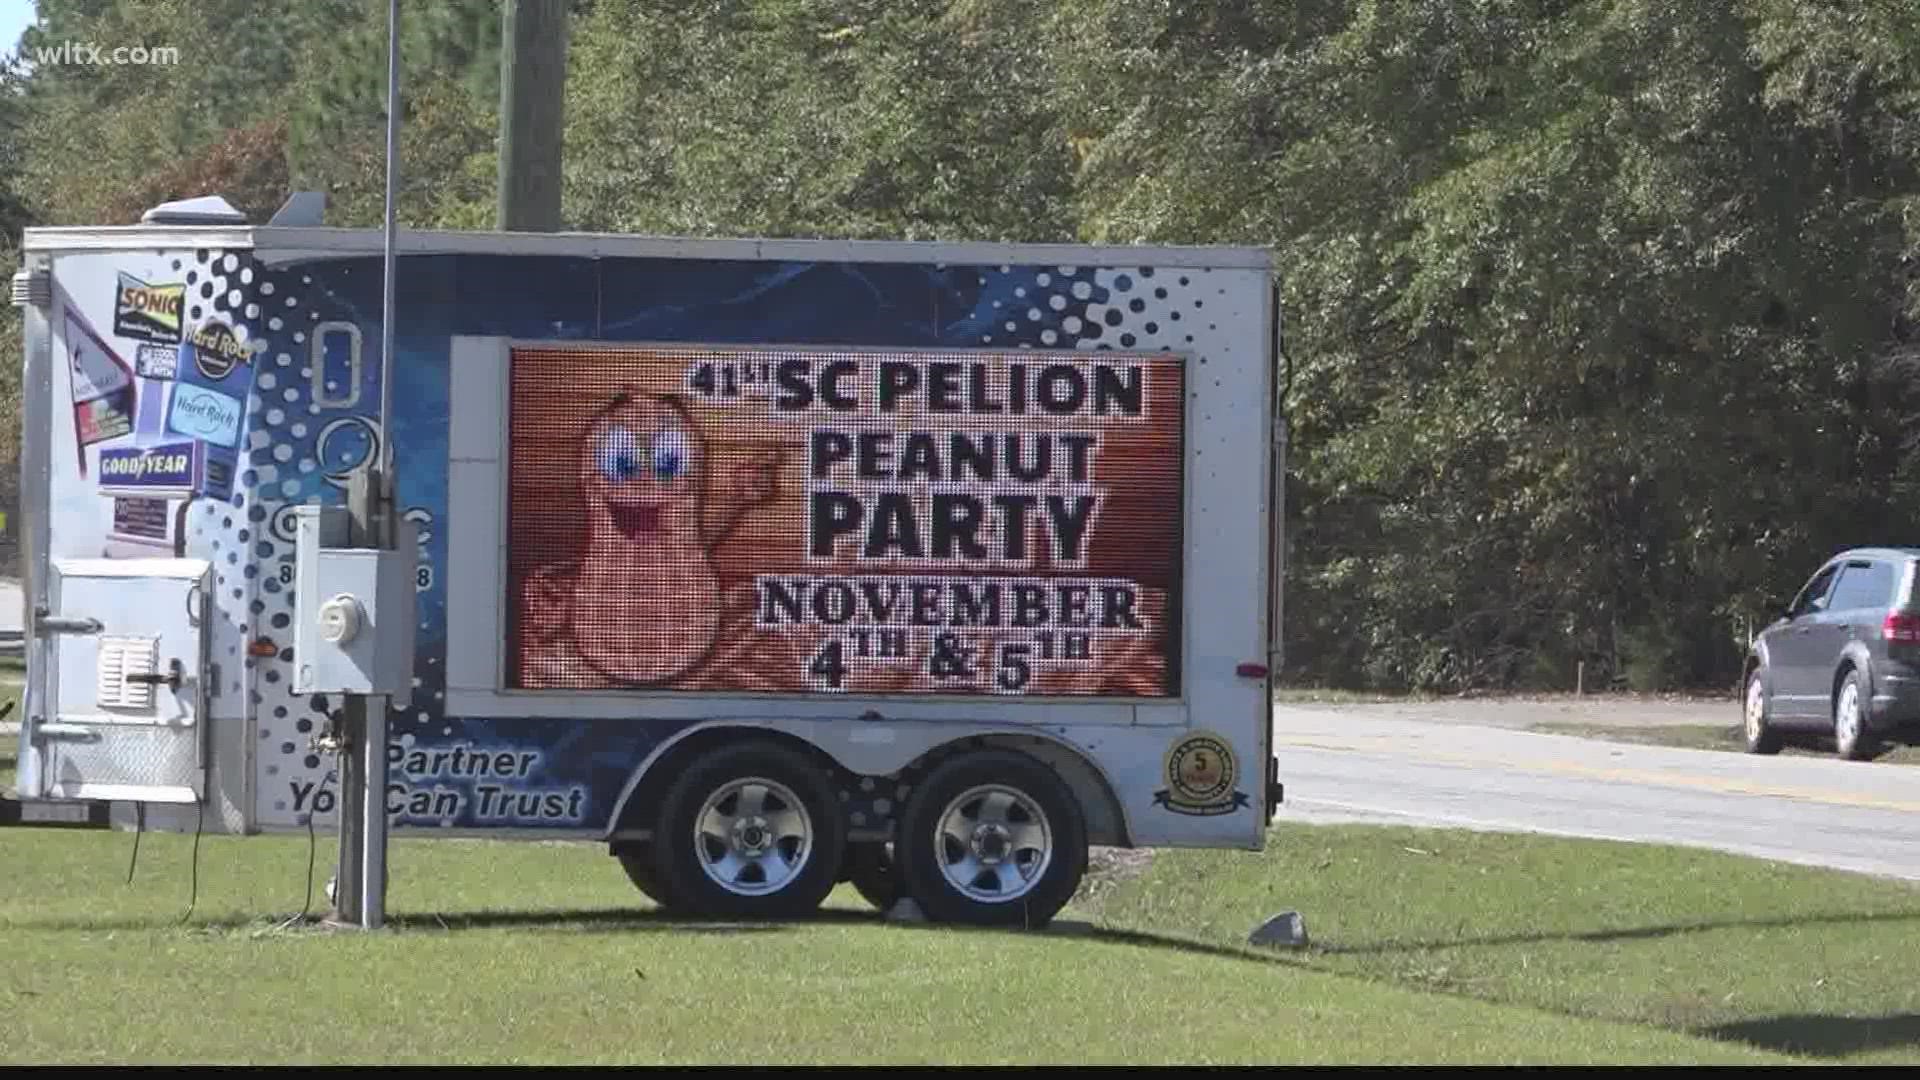 Pelion Peanut Party is this weekend